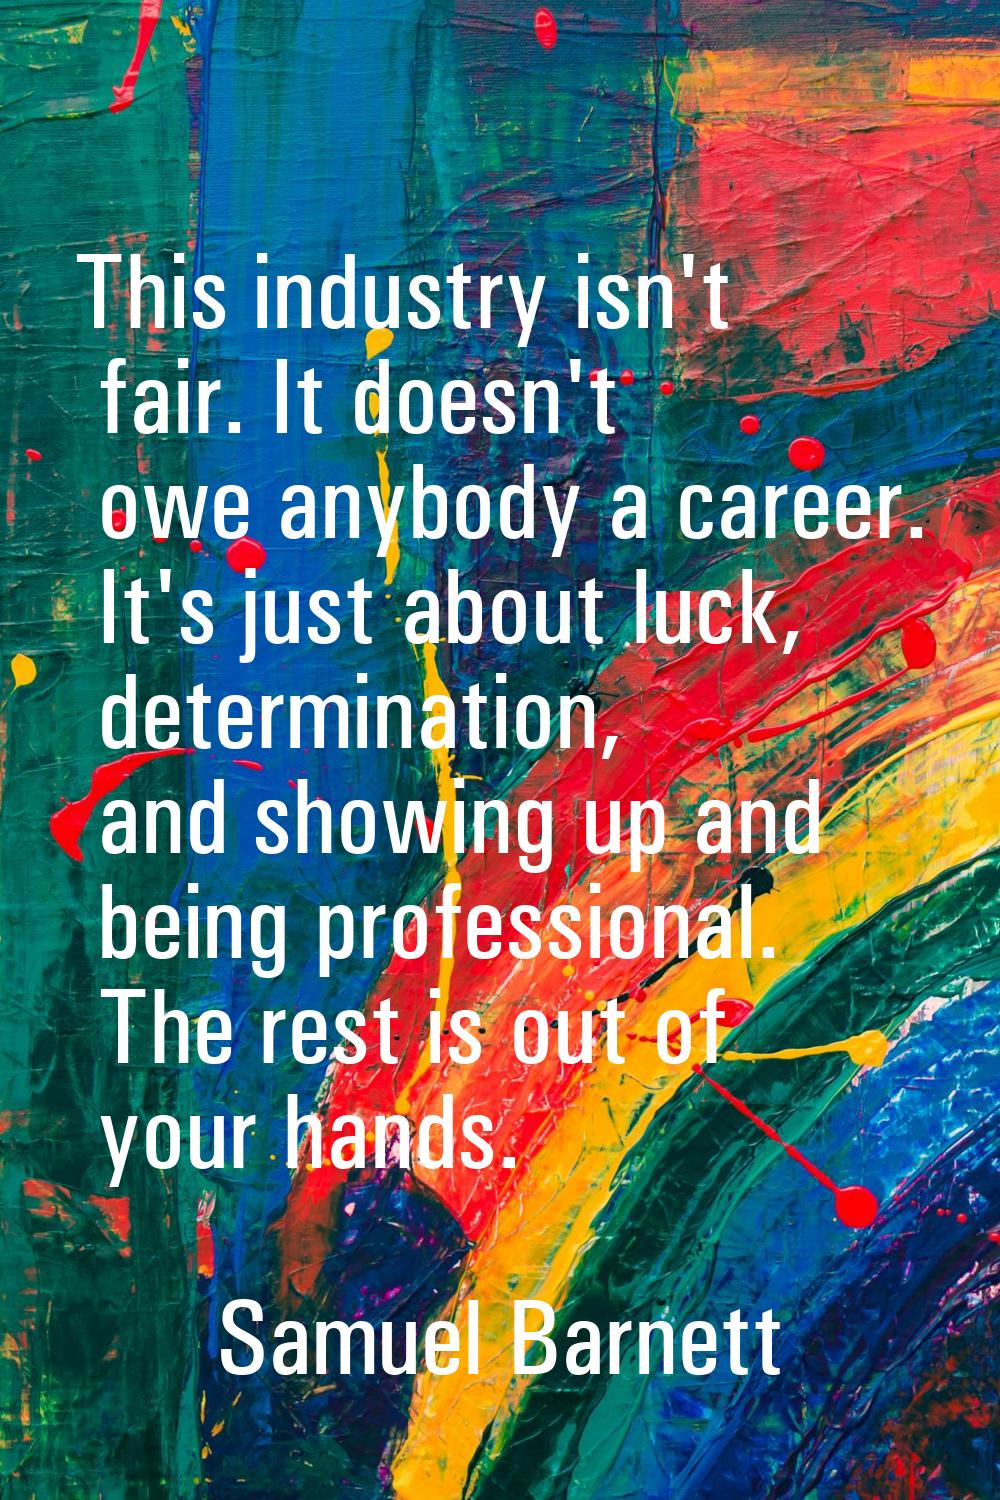 This industry isn't fair. It doesn't owe anybody a career. It's just about luck, determination, and